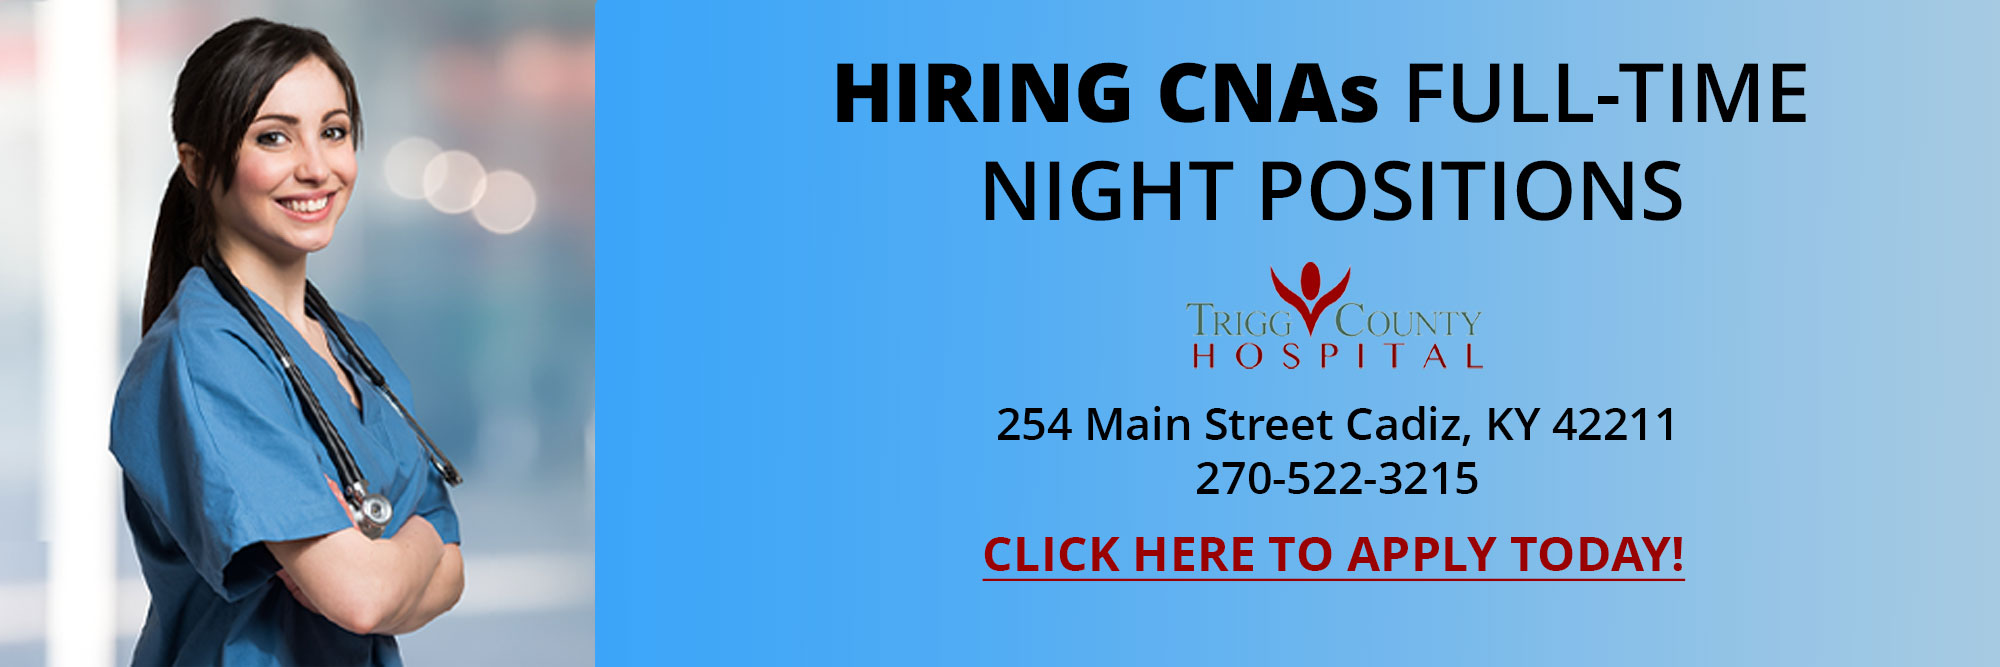 HIRING CNAs FULL-TIME
NIGHT POSITIONS

245 Main Street Cadiz, KY 42211
270-522-3215

CLICK HERE TO APPLY TODAY!